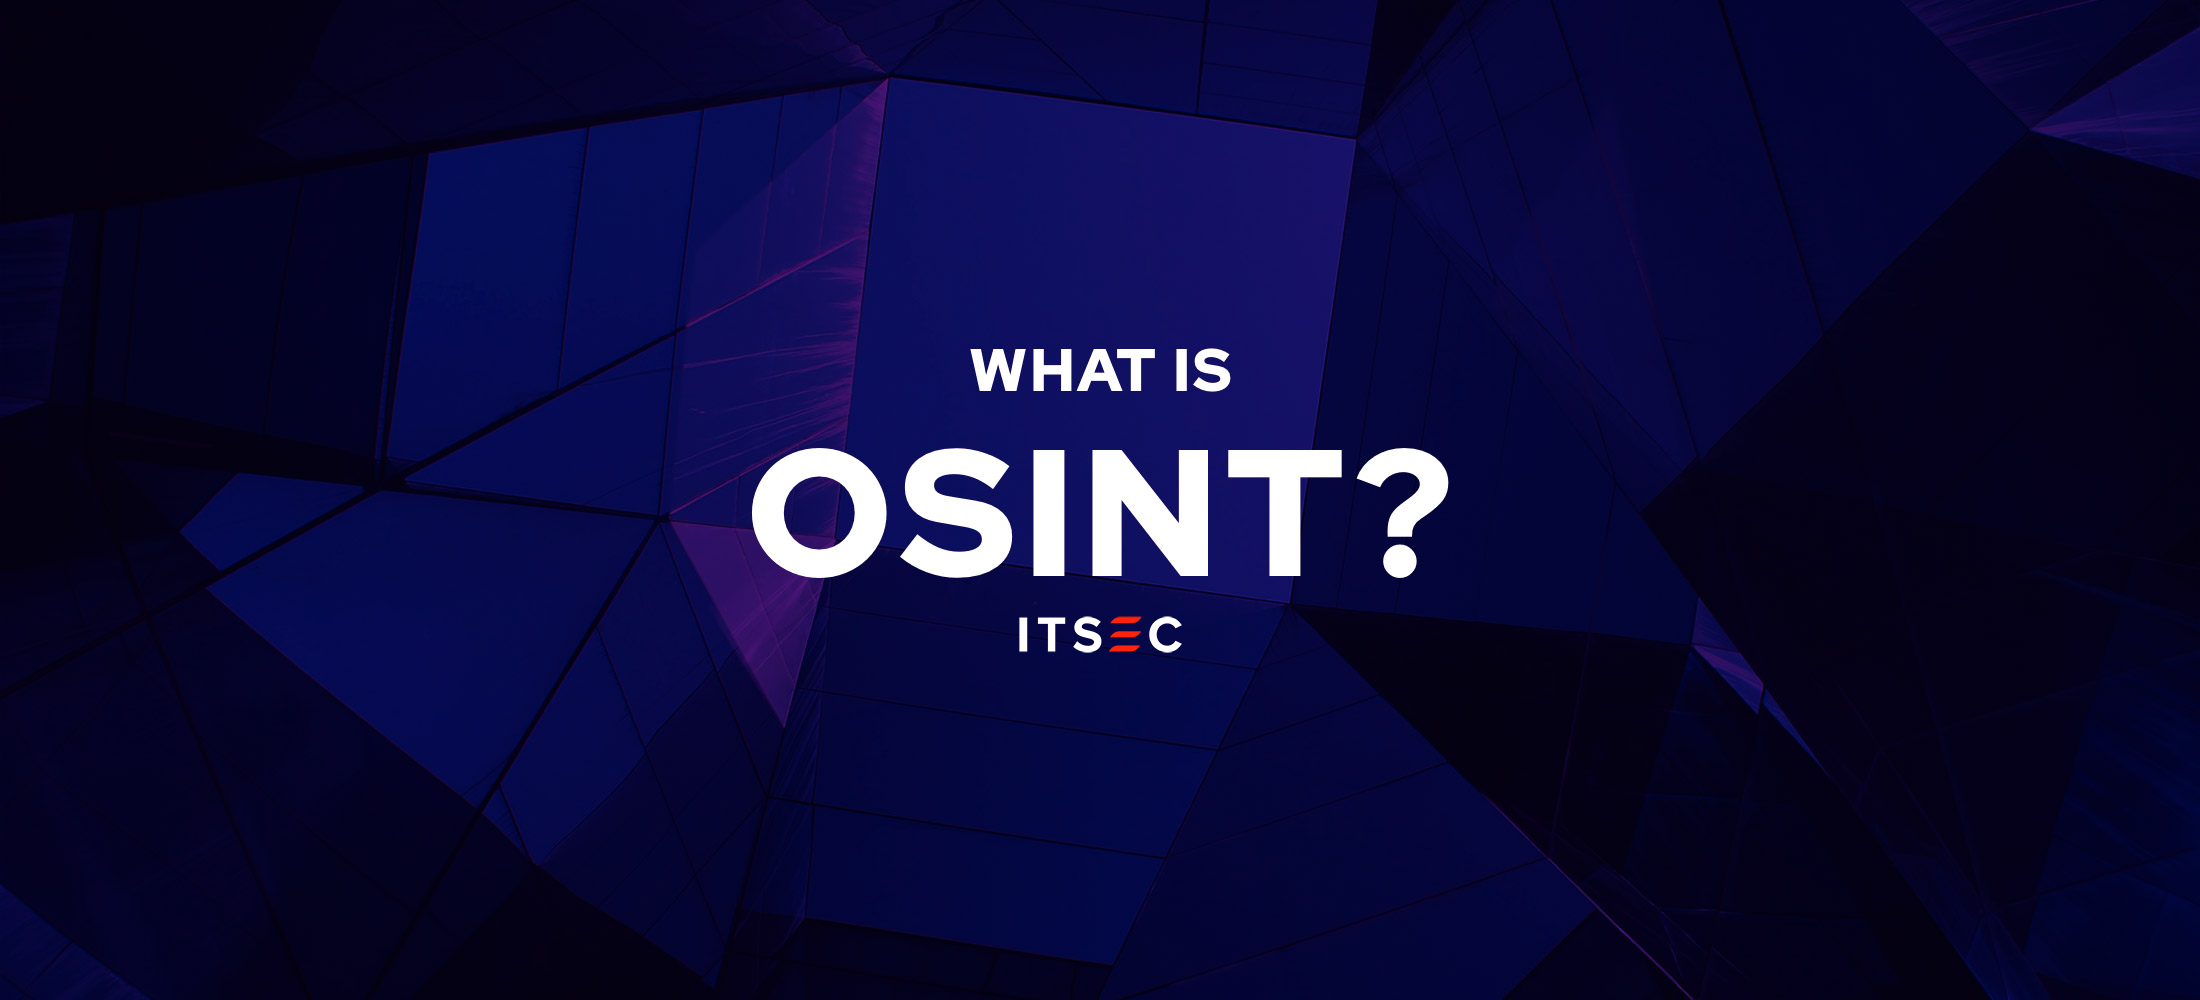 What is OSINT and how does it affect commercial law?